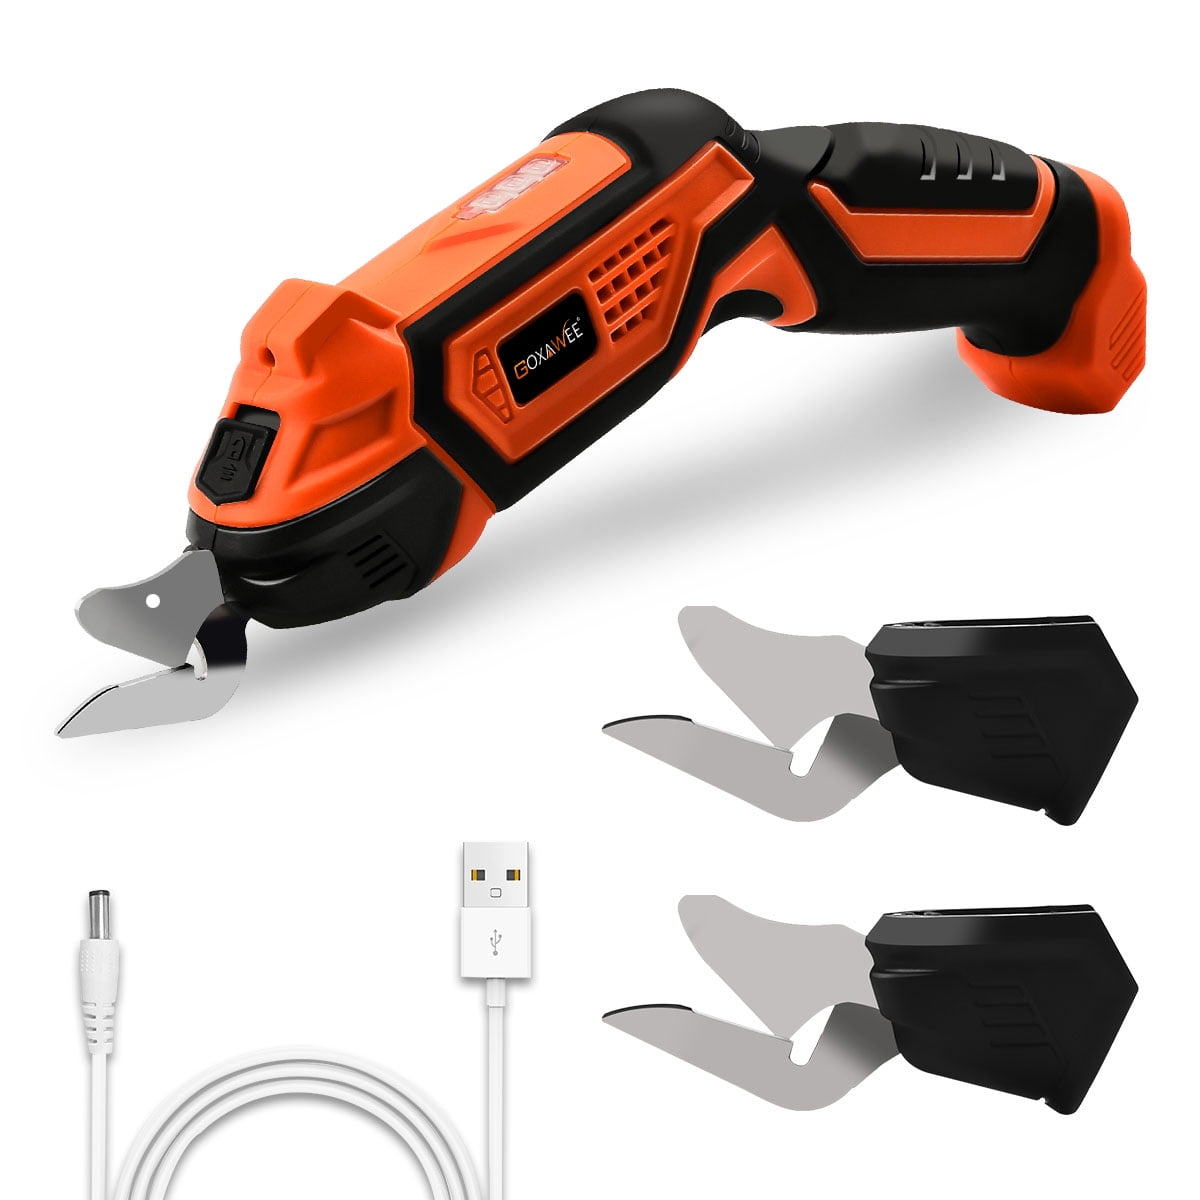 VOLLTEK Electric Cordless Scissor 4V li-ion Cutter Shears with 2 battery &  2 Pcs Cutting Blades Accessory for Cutting Fabric, Carpet and Leather  ES3601 Orange 